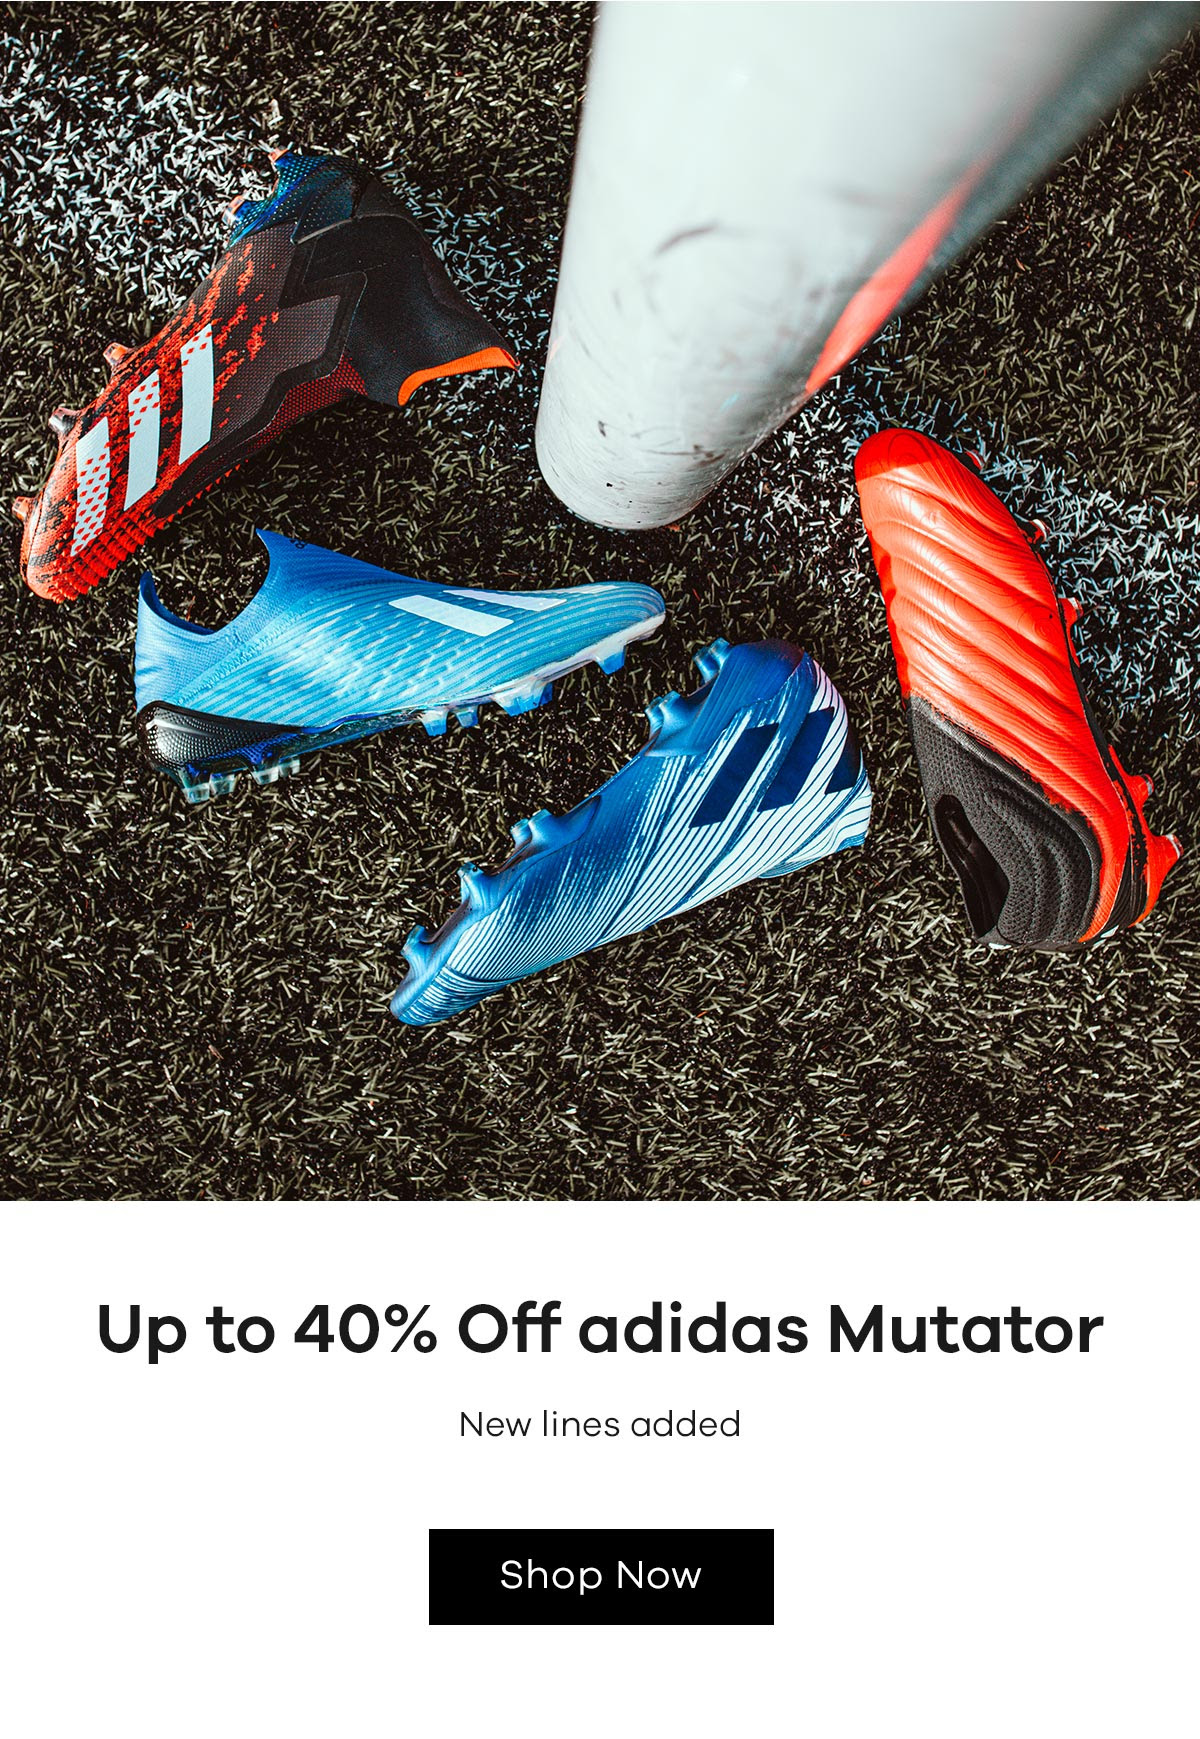 Lovell Rugby - Save On The Latest adidas & Nike Boots